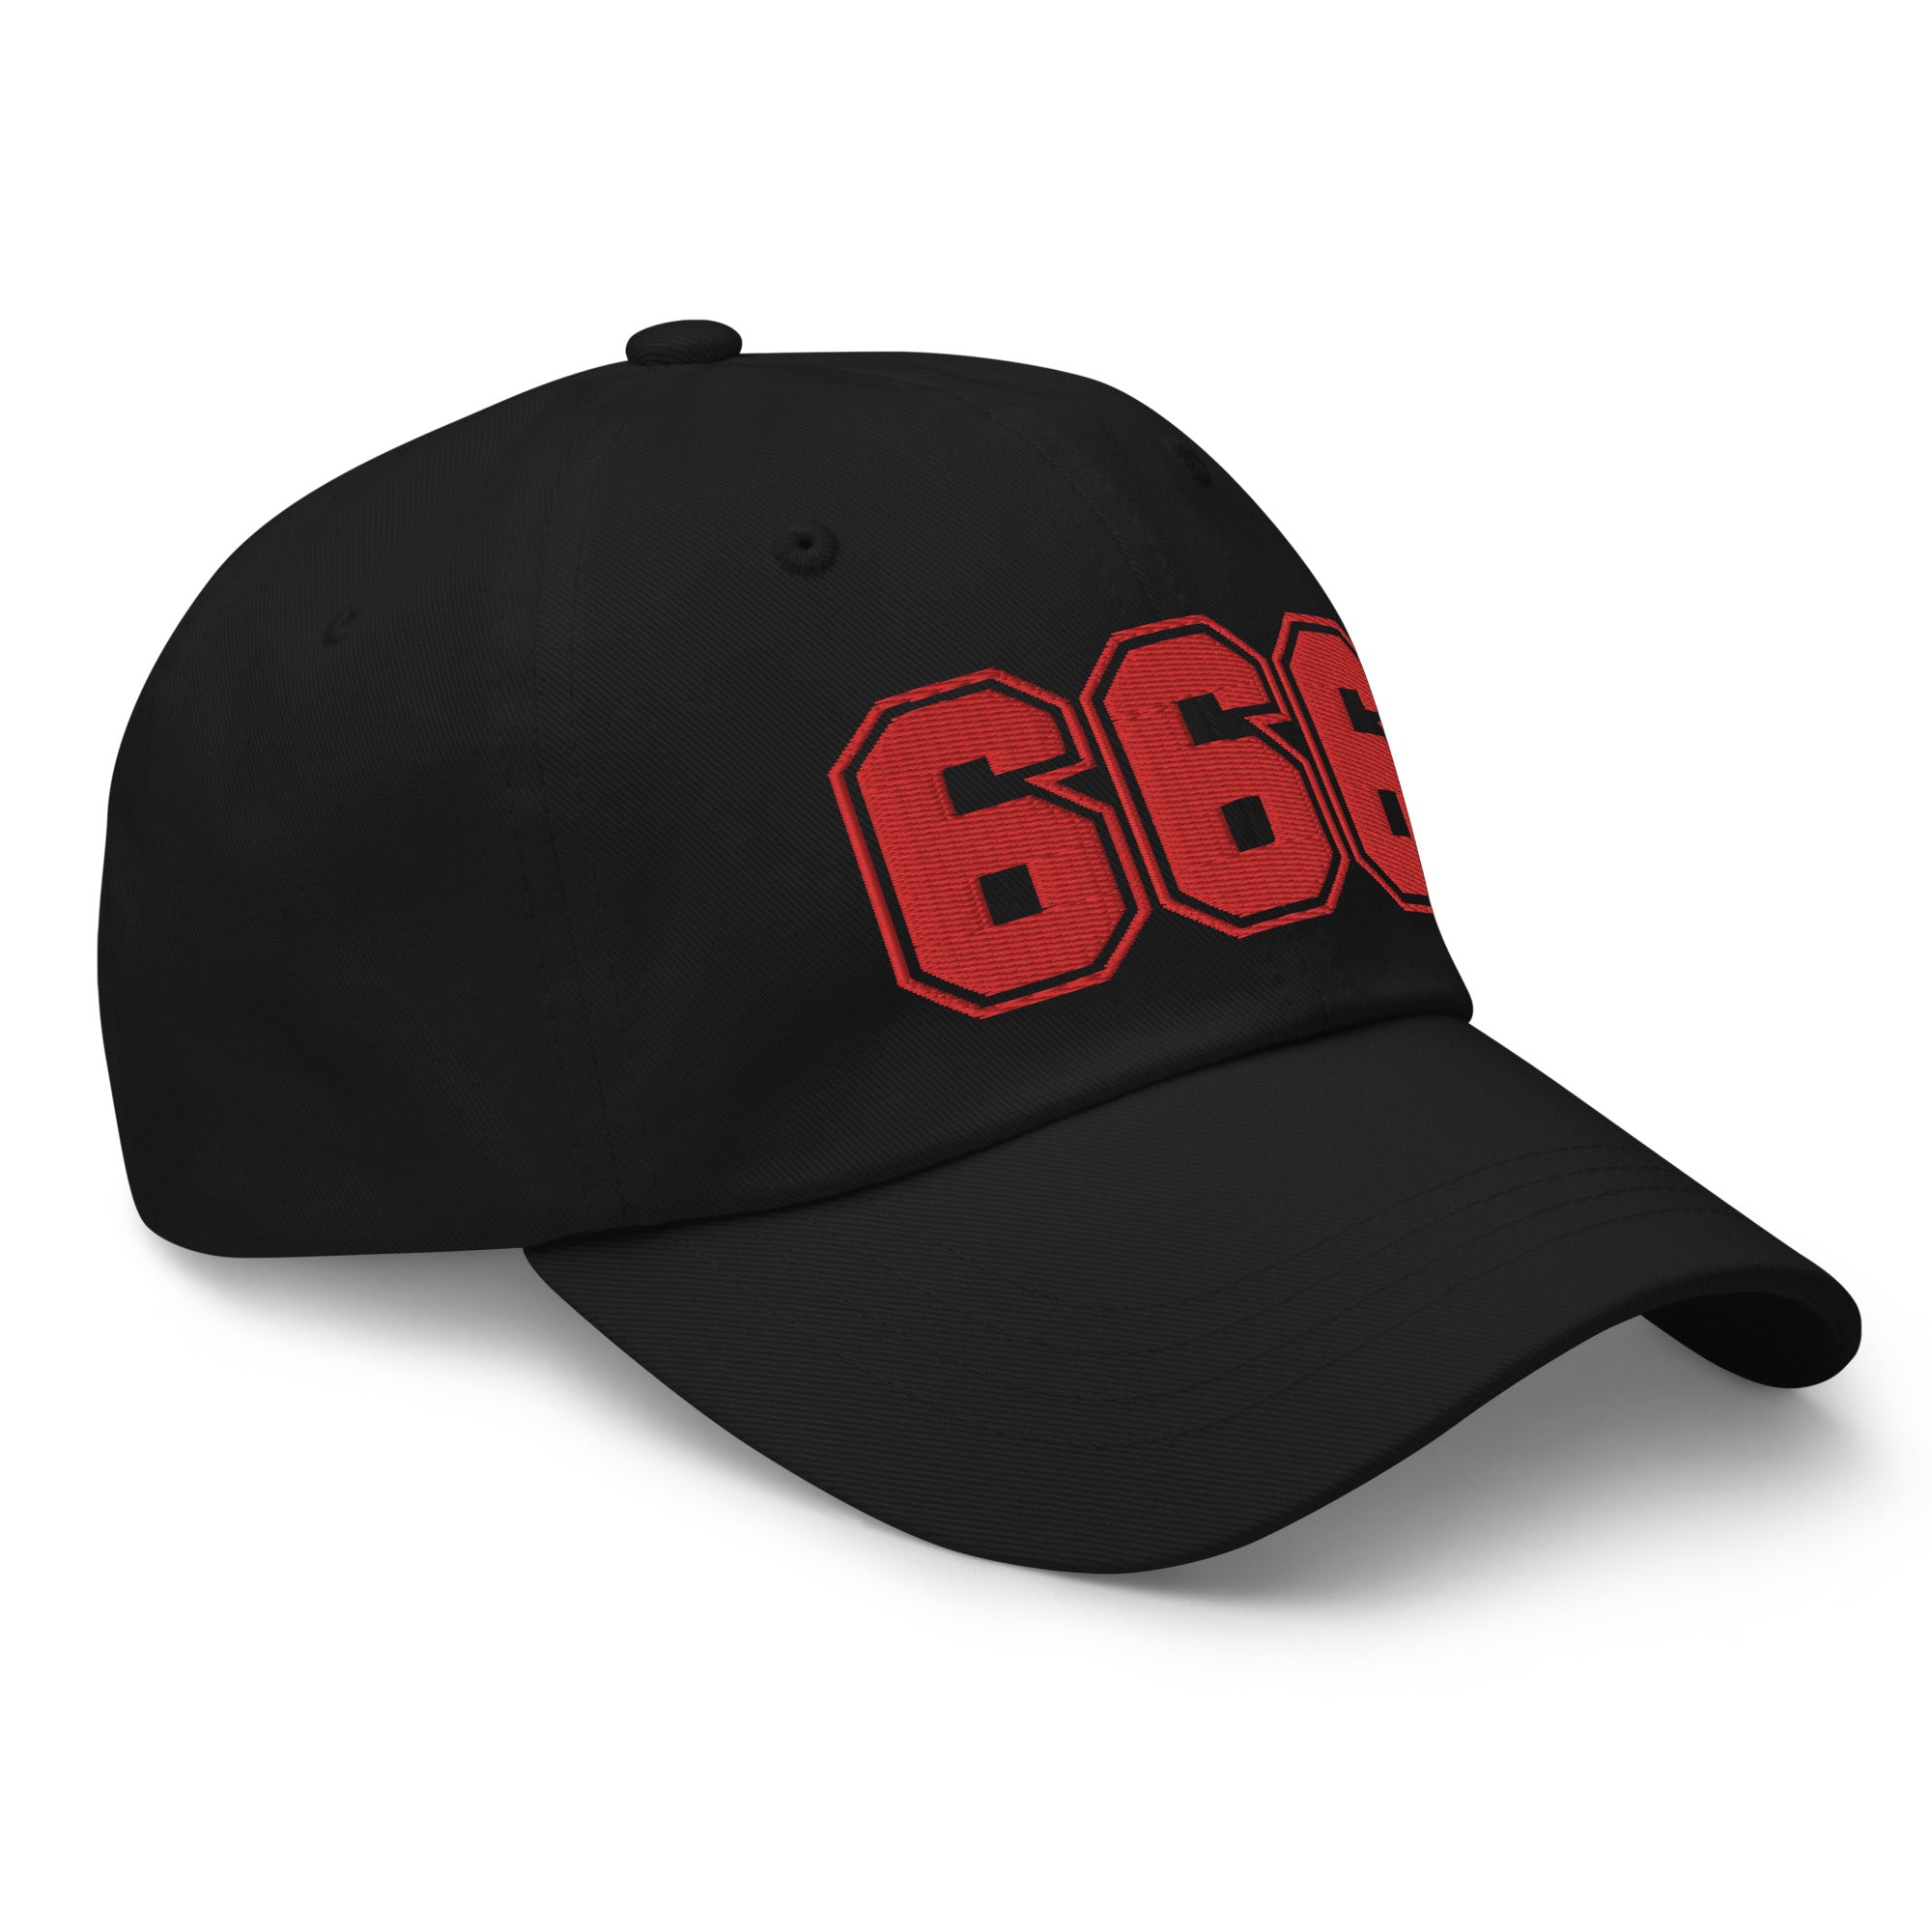 666 The Number of the Beast Evil Embroidered Baseball Cap Dad hat Red Thread - Edge of Life Designs